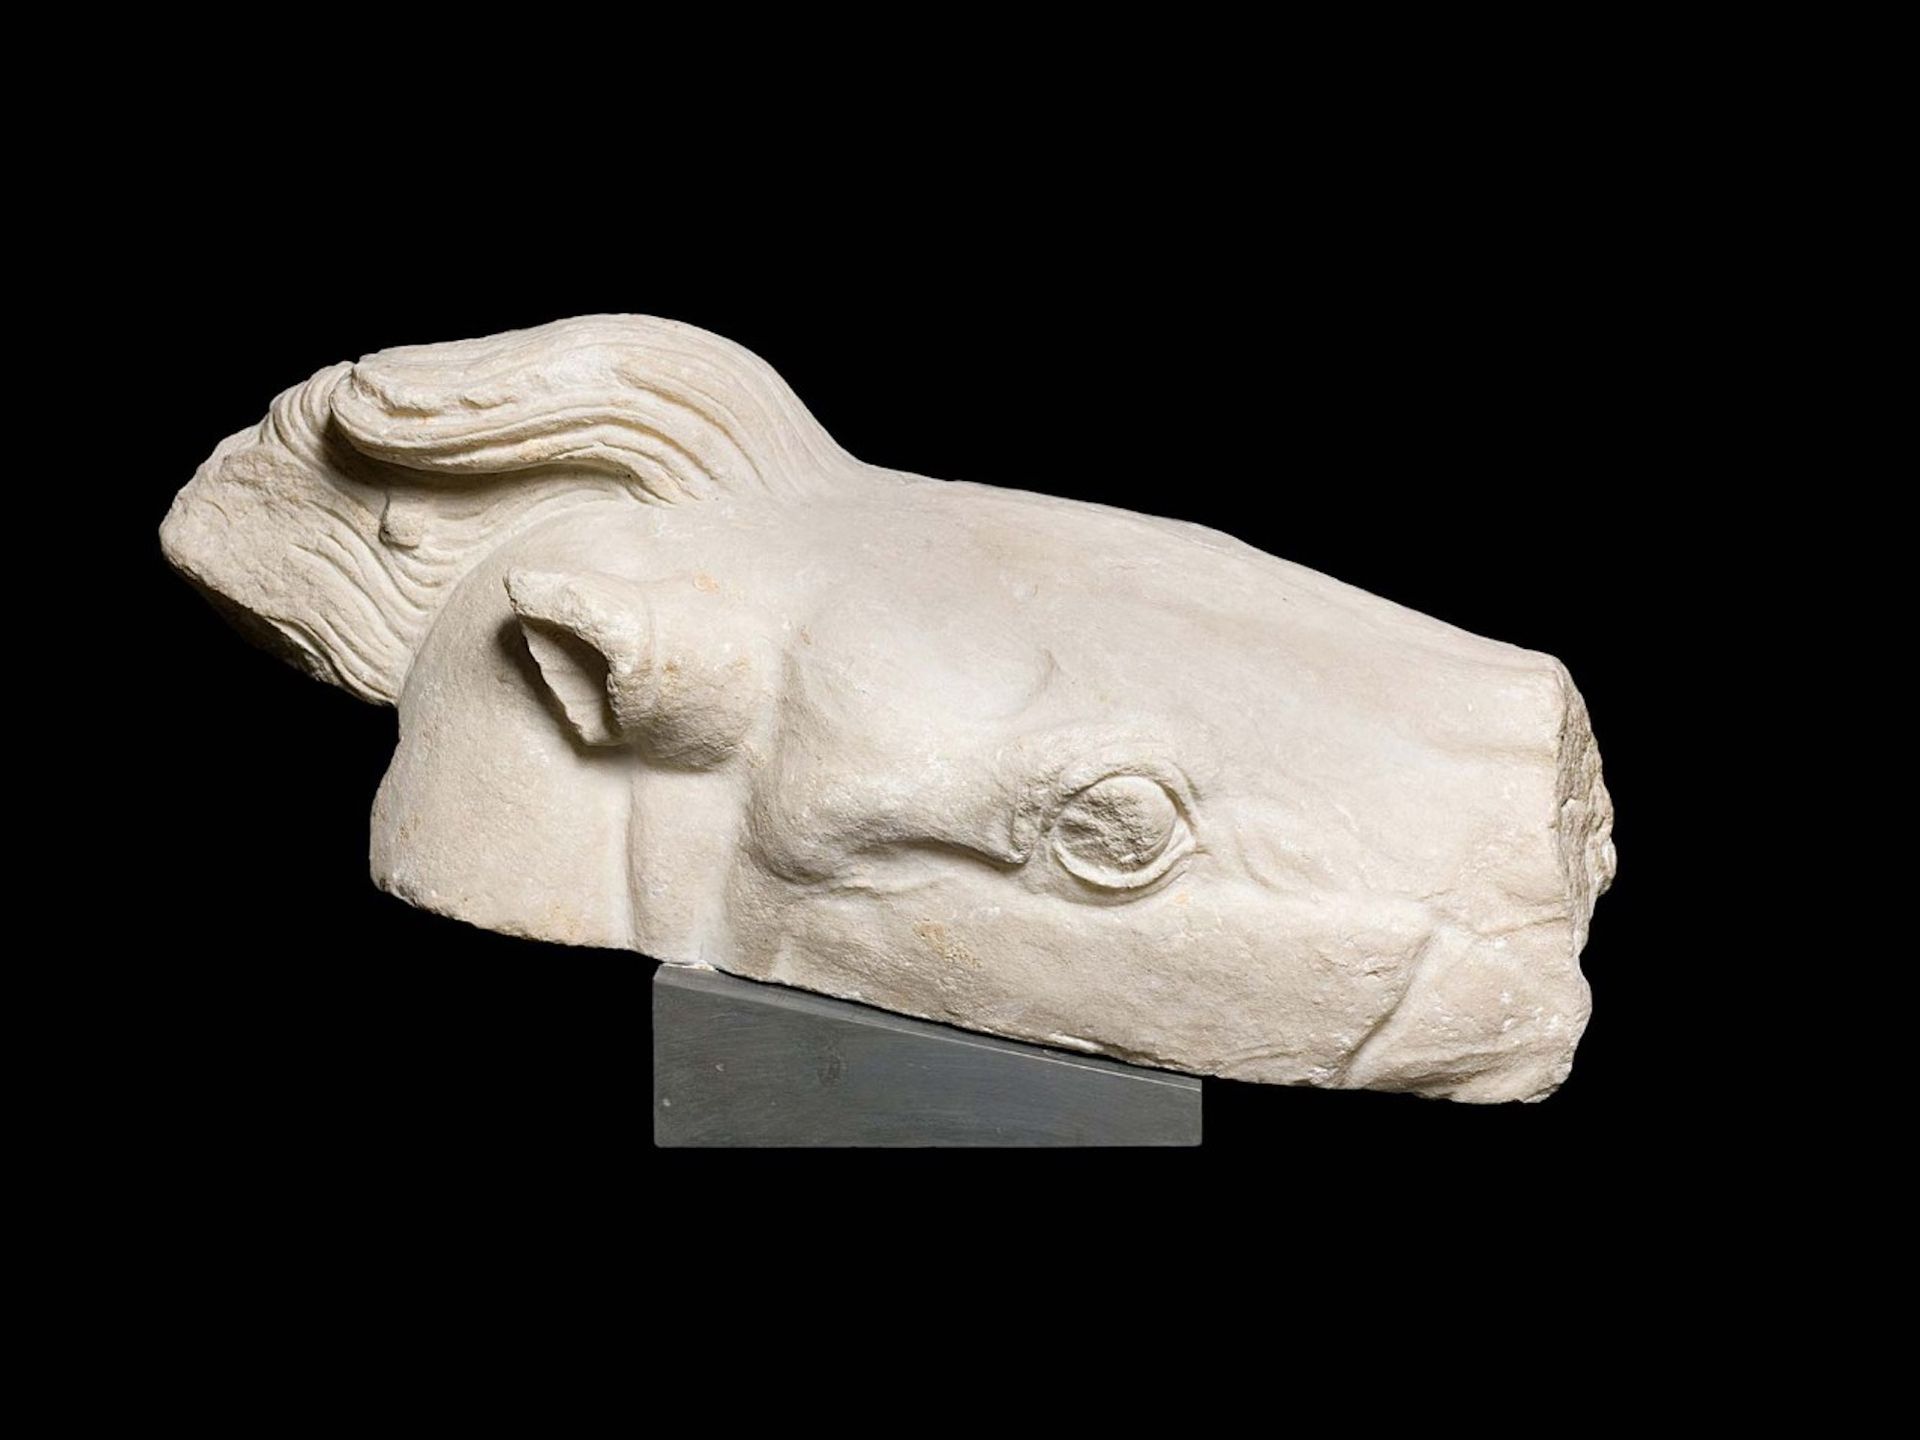 One of the three sculptural Parthenon sculpture fragments in the collection of the Vatican Museums, which depicts part of the head of the horse pulling Athena's chariot Vatican Museums